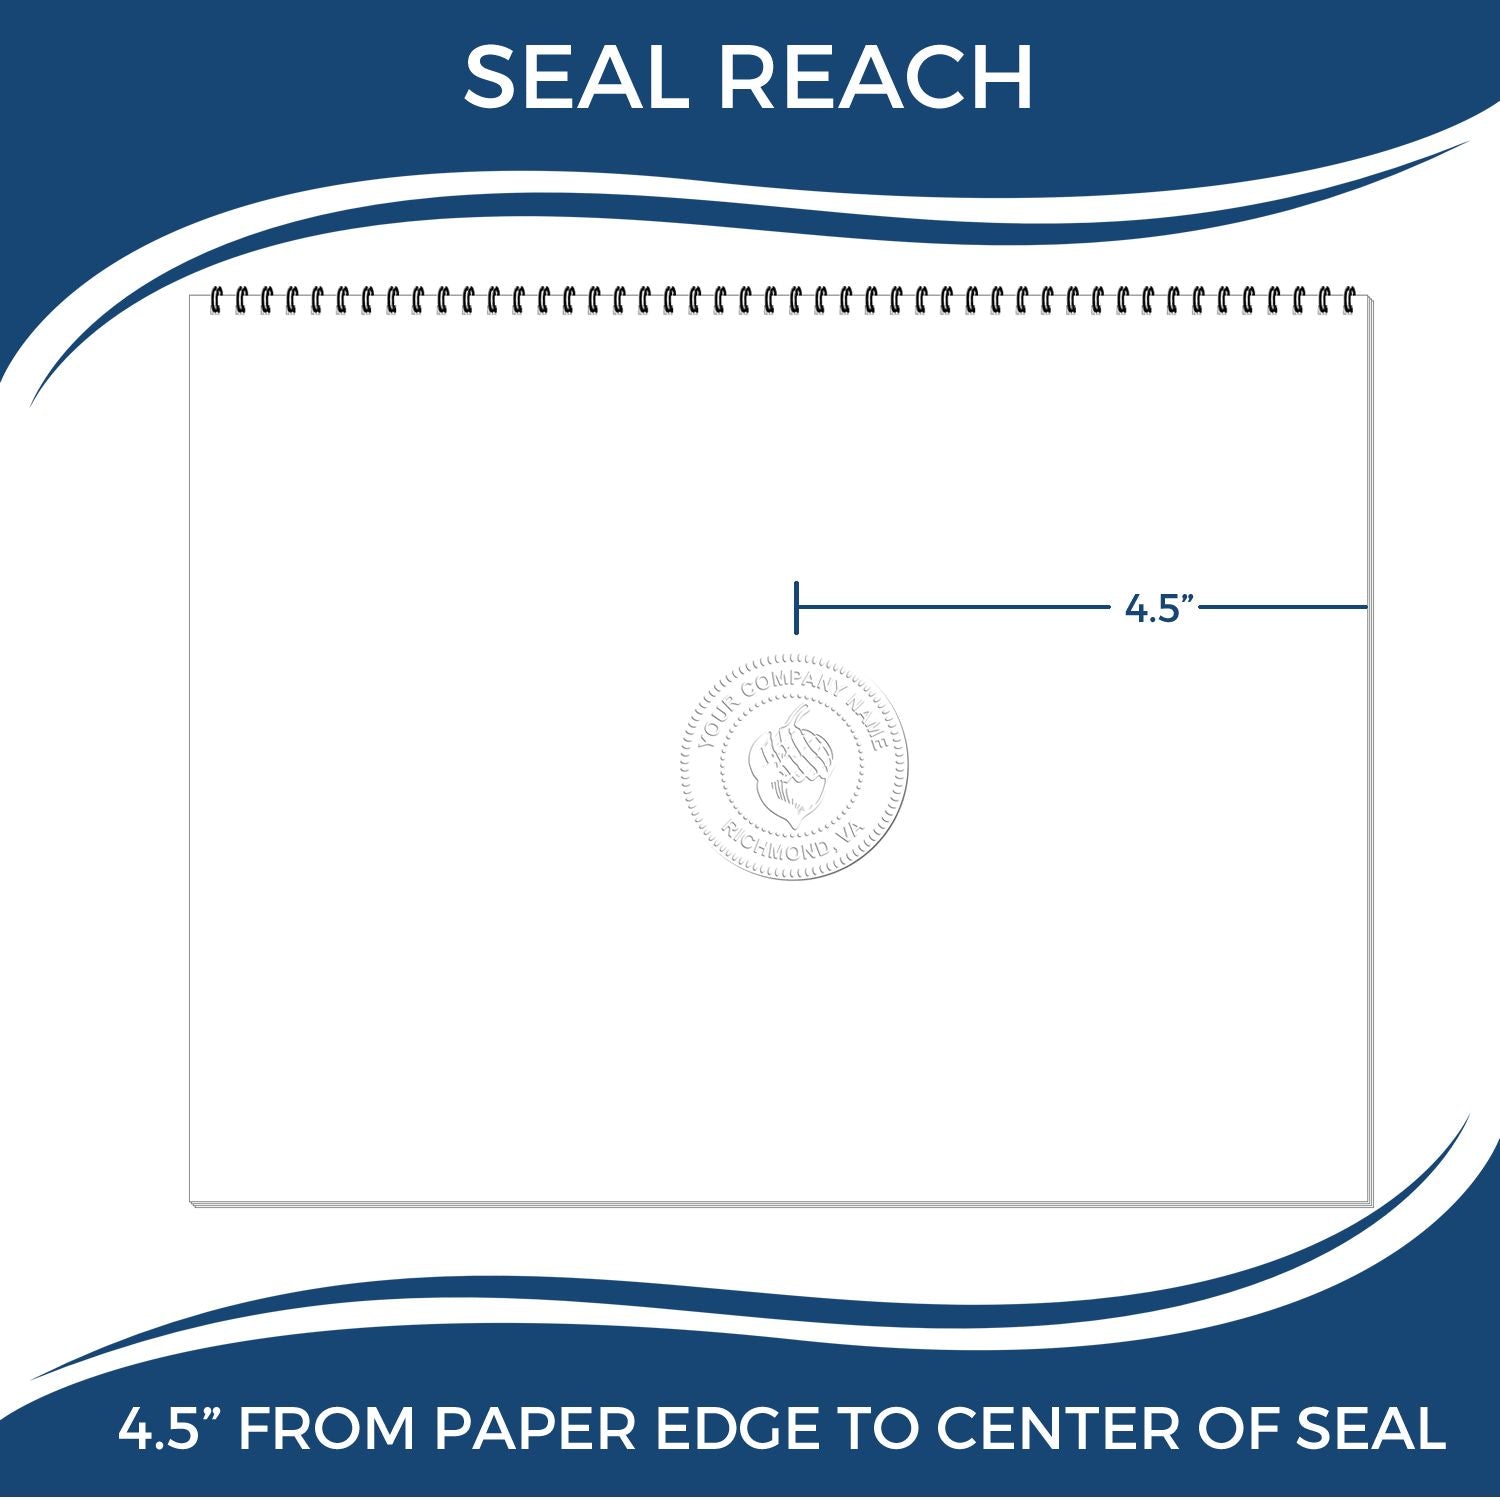 An infographic showing the seal reach which is represented by a ruler and a miniature seal image of the Extended Long Reach Iowa Architect Seal Embosser